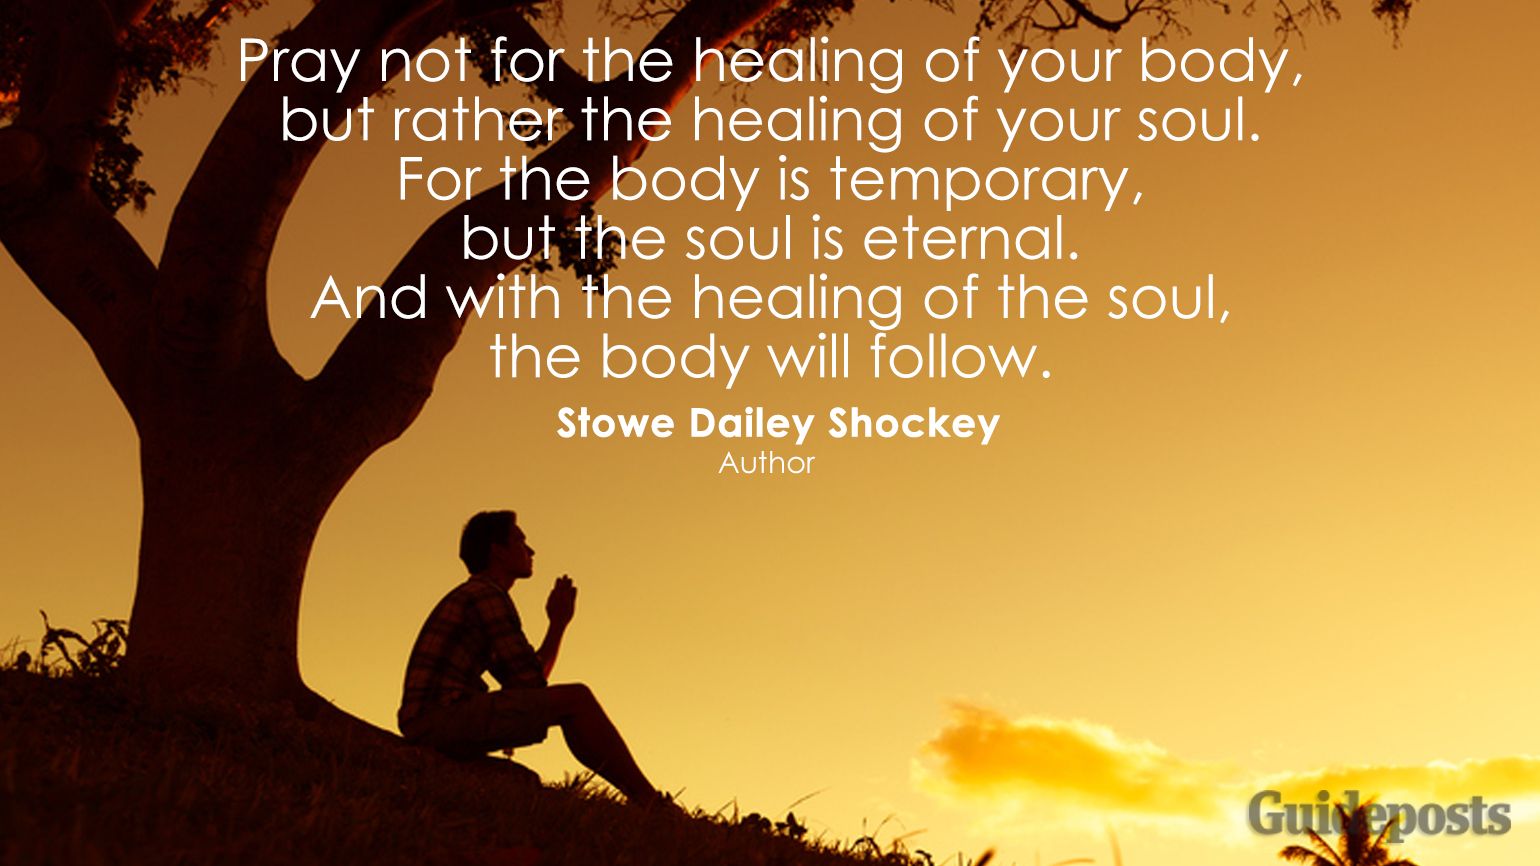 Pray not for the healing of your body, but rather the healing of your soul. For the body is temporary, but the soul is eternal. And with the healing of the soul, the body will follow.